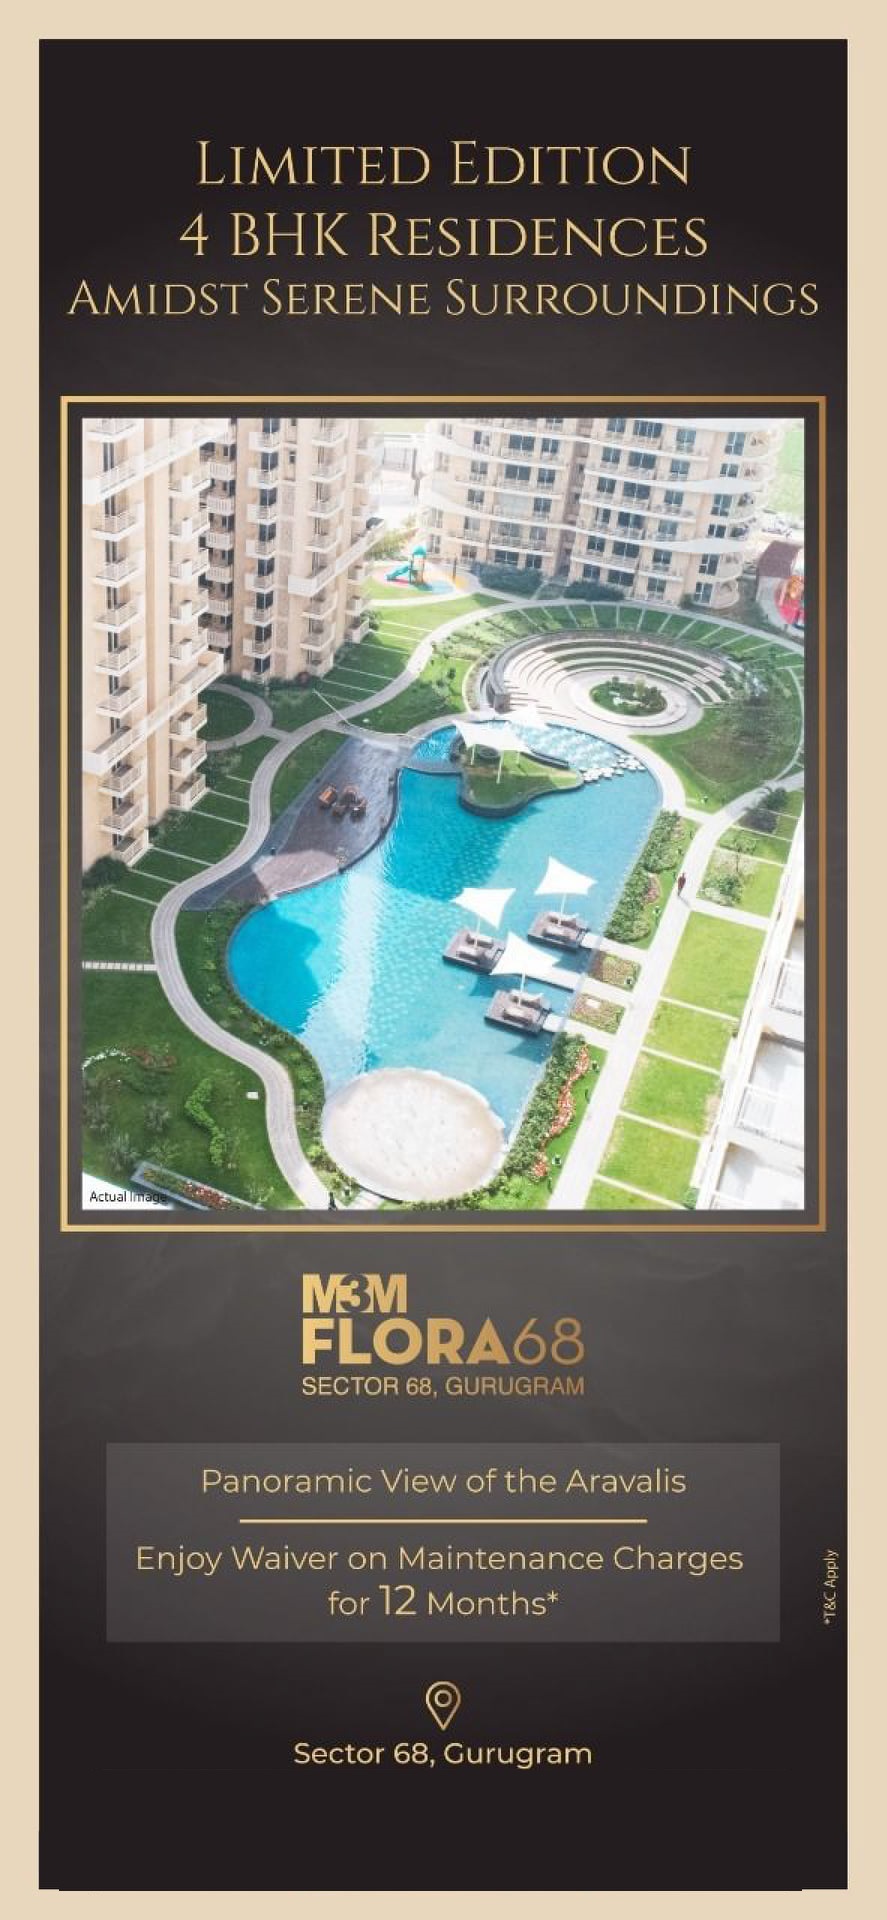 Limited edition 4 BHK residences amidst serene Surroundings at M3M Flora 68, Gurgaon Update